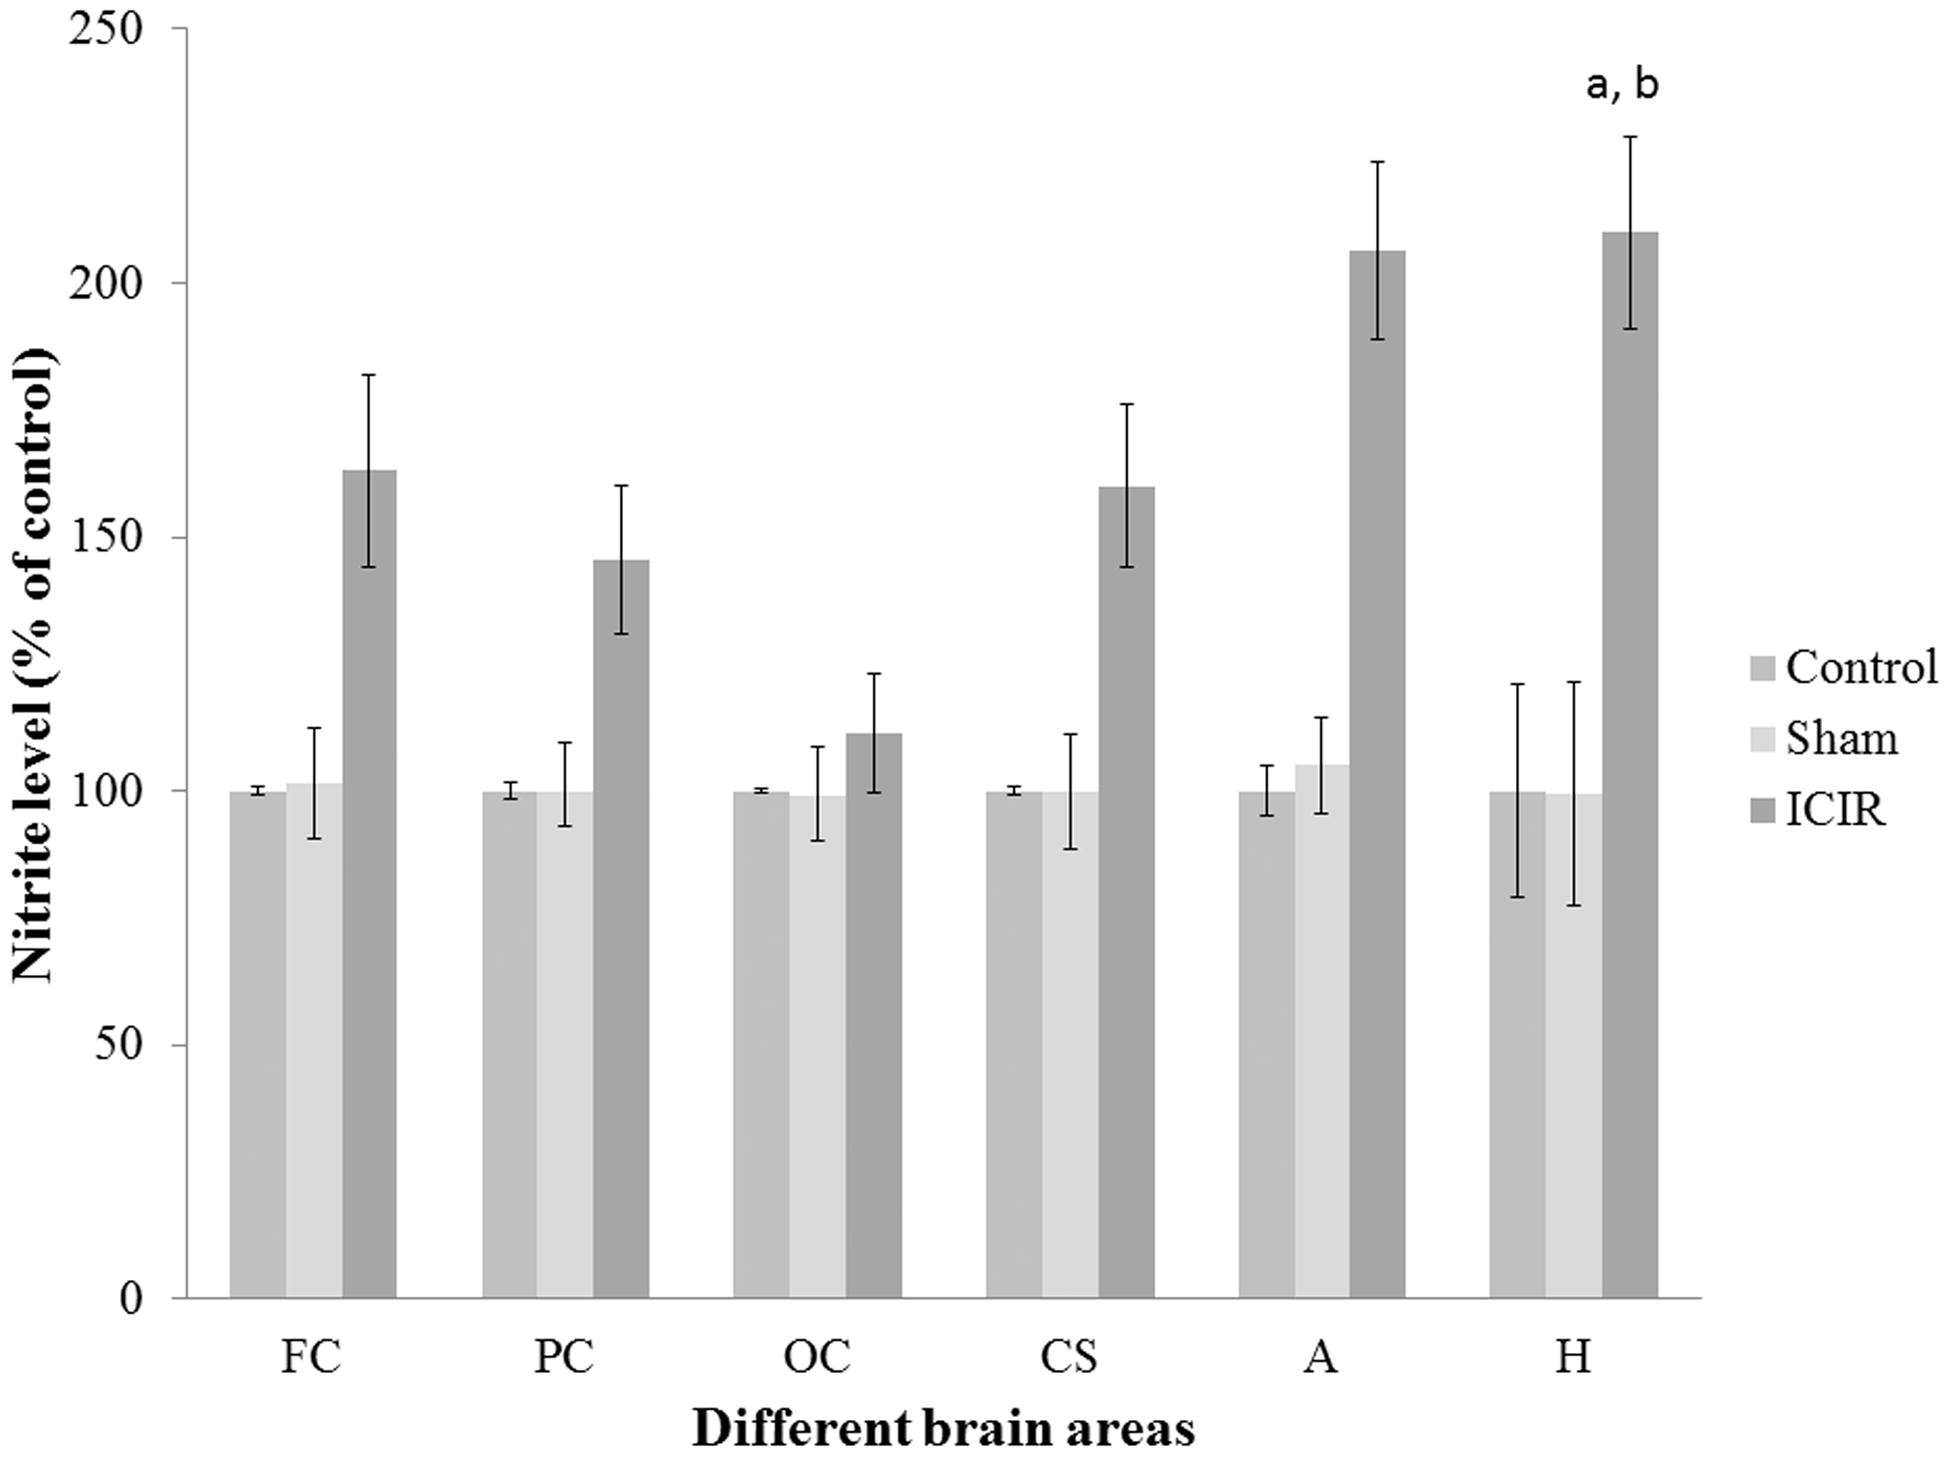 Figure 10. Nitrite levels in different brain areas of rats. (a) Significant difference (p < 0.001) between hippocampus levels in C and S rats vs in ICIR hosts. (b) Significant difference (p < 0.001) between hippocampus vs amygdala, frontal cortex, parietal cortex, occipital cortex and corpus striatum in ICIR hosts. Values shown are means ± SEM (n = 6/group). Abbreviations are as outlined in legend to Figure 3.